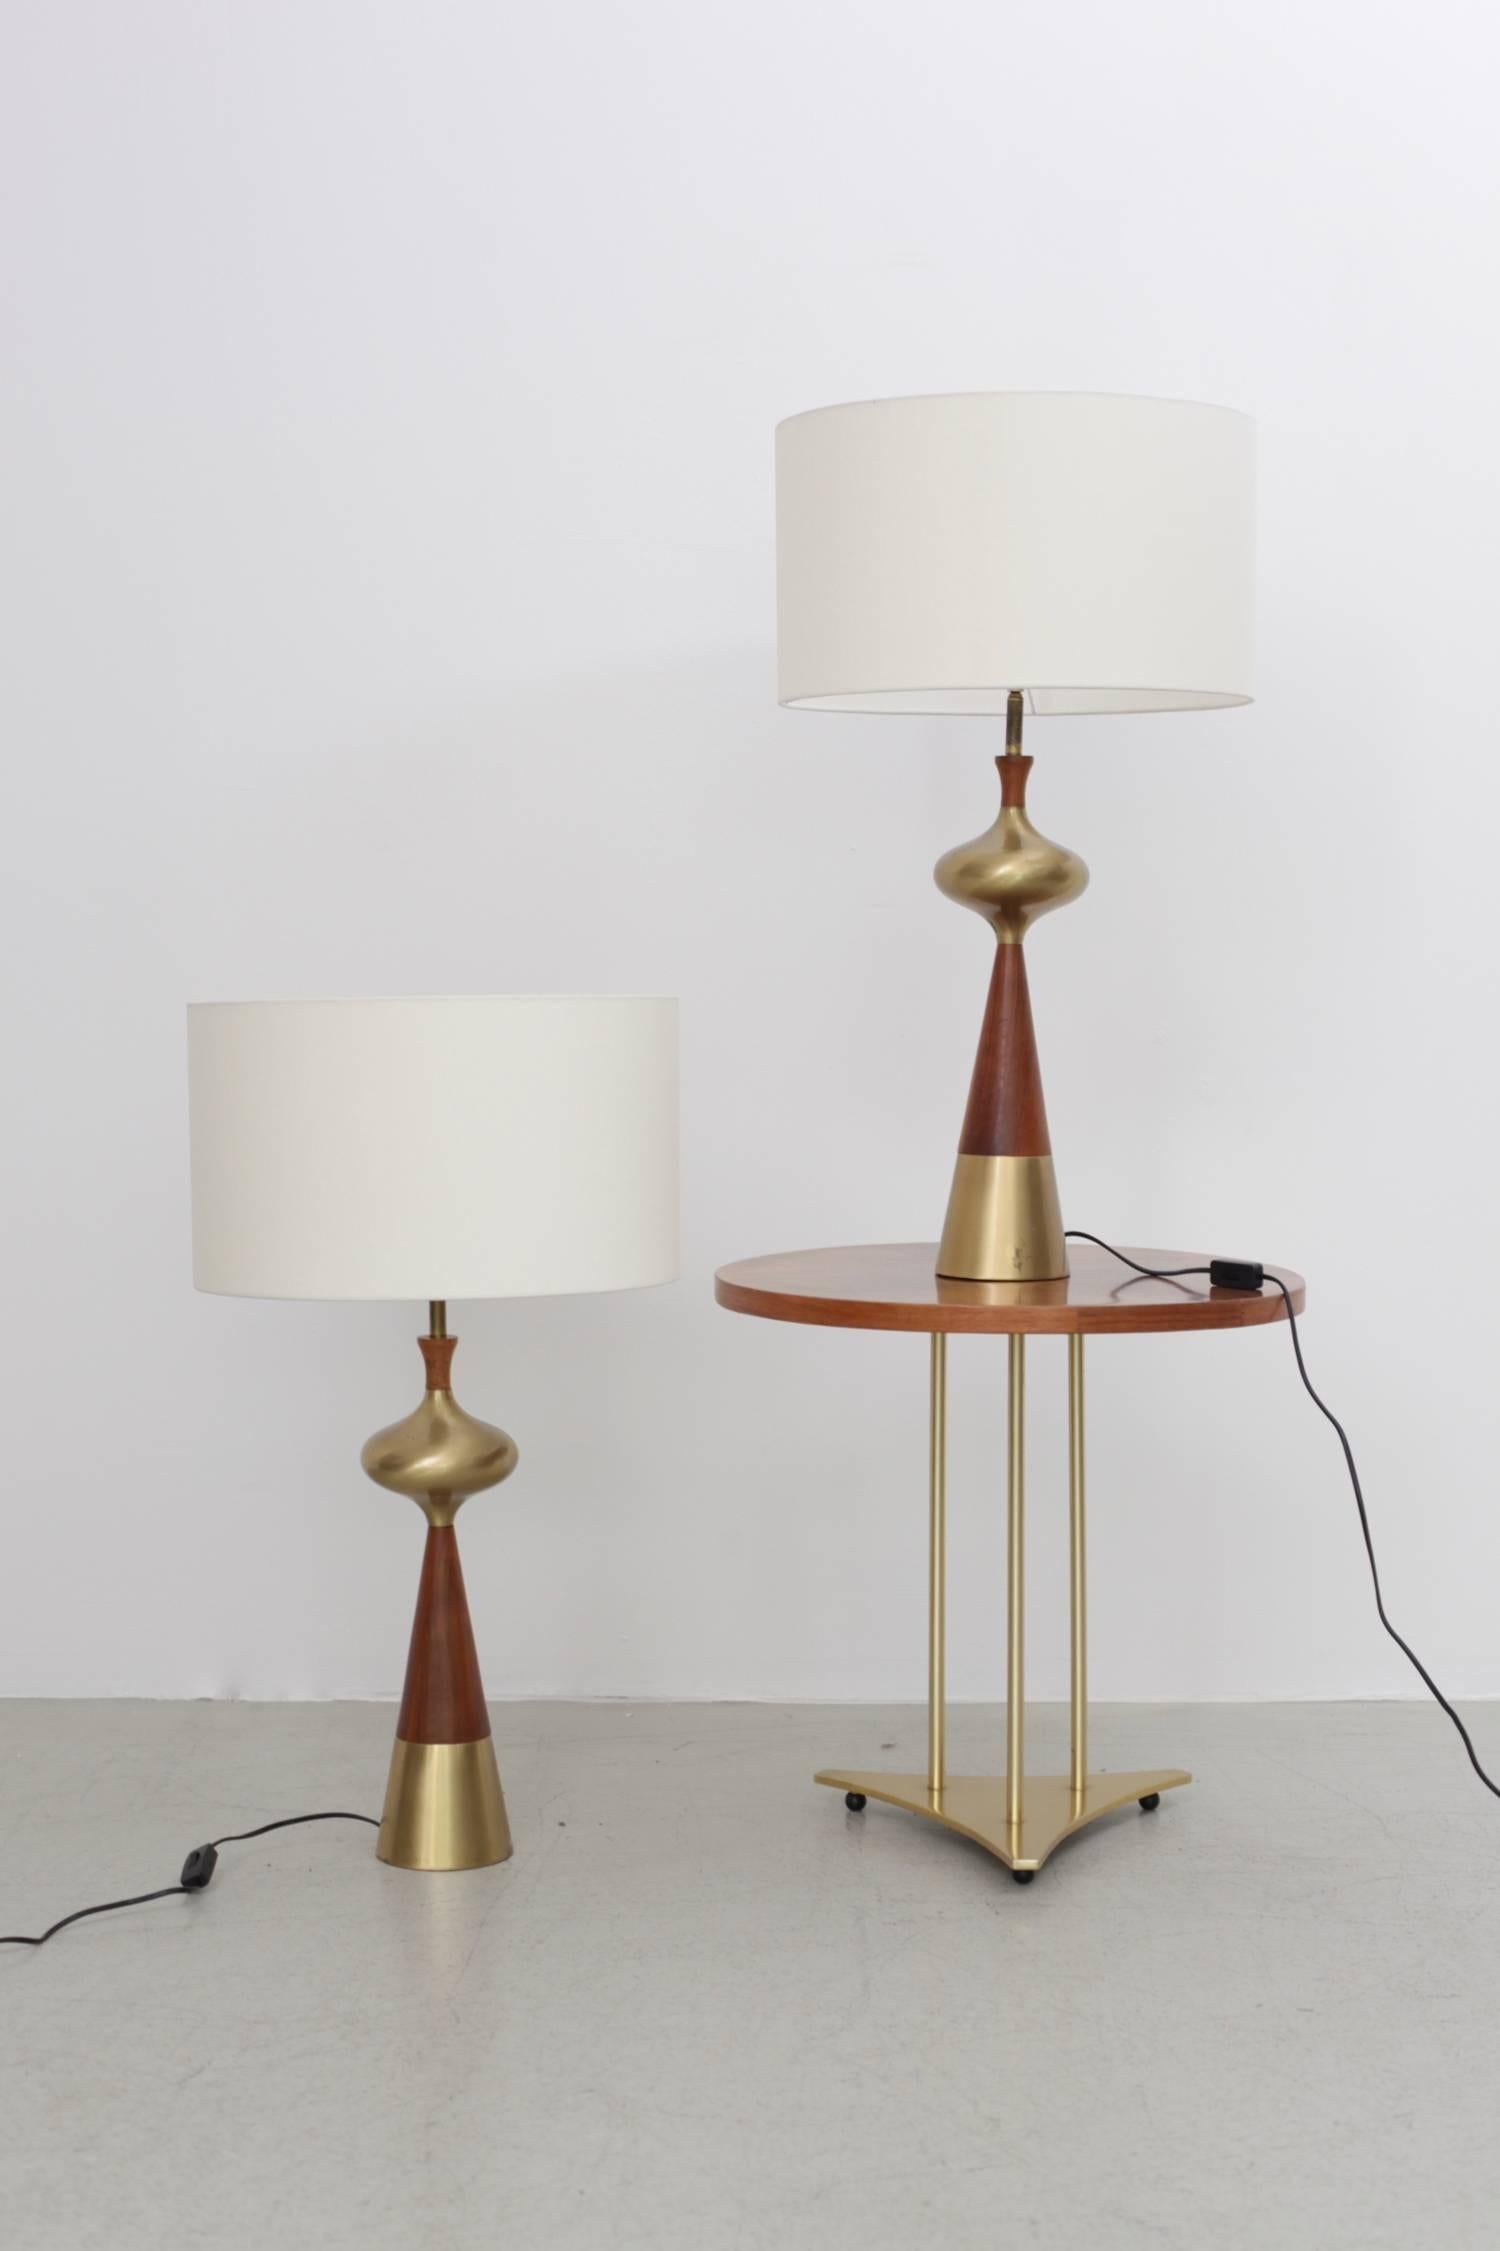 Set of two beautiful table lamps in walnut and brass by Tony Paul for Westwood, 1950s. These lamps are in excellent condition with new ivory colored shades.
To be on the safe side, the lamp should be checked locally by a specialist concerning local